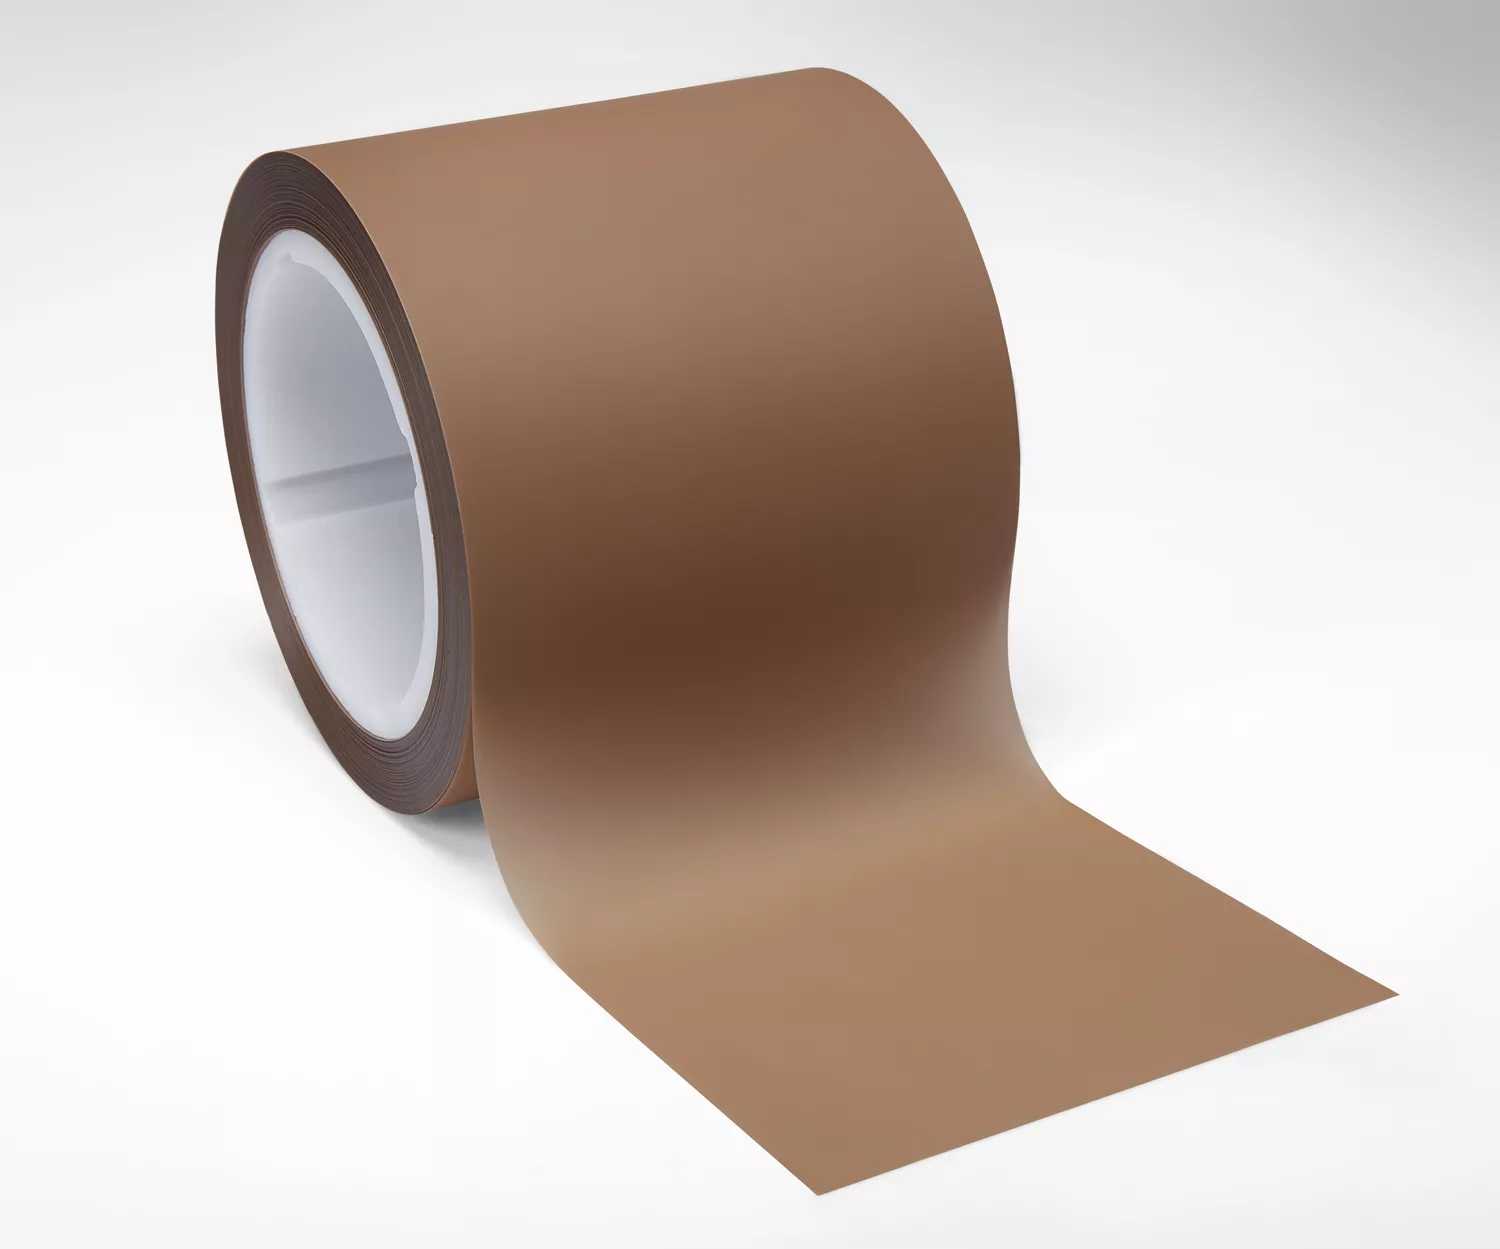 3M™ Lapping Film 261X, 5.0 Micron Roll, 4 in x 150 ft x 3 in ASO Keyed
Core, 4/Case